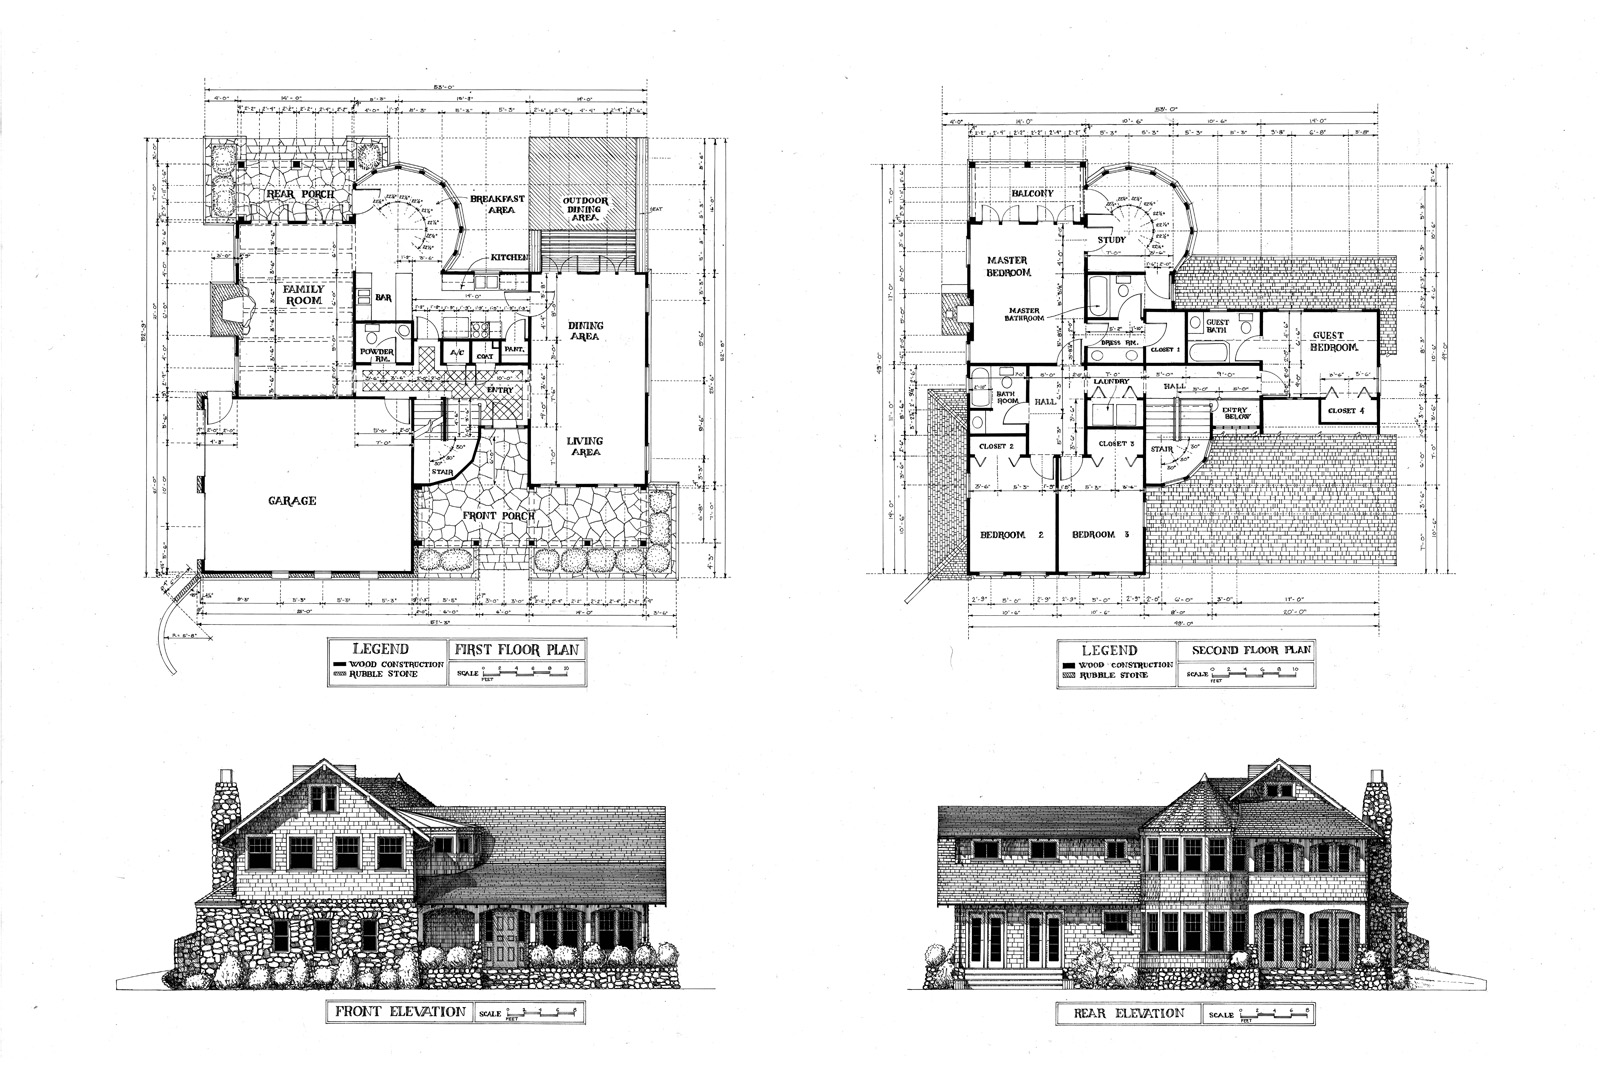  house floor plan with dimensions and elevations  House  